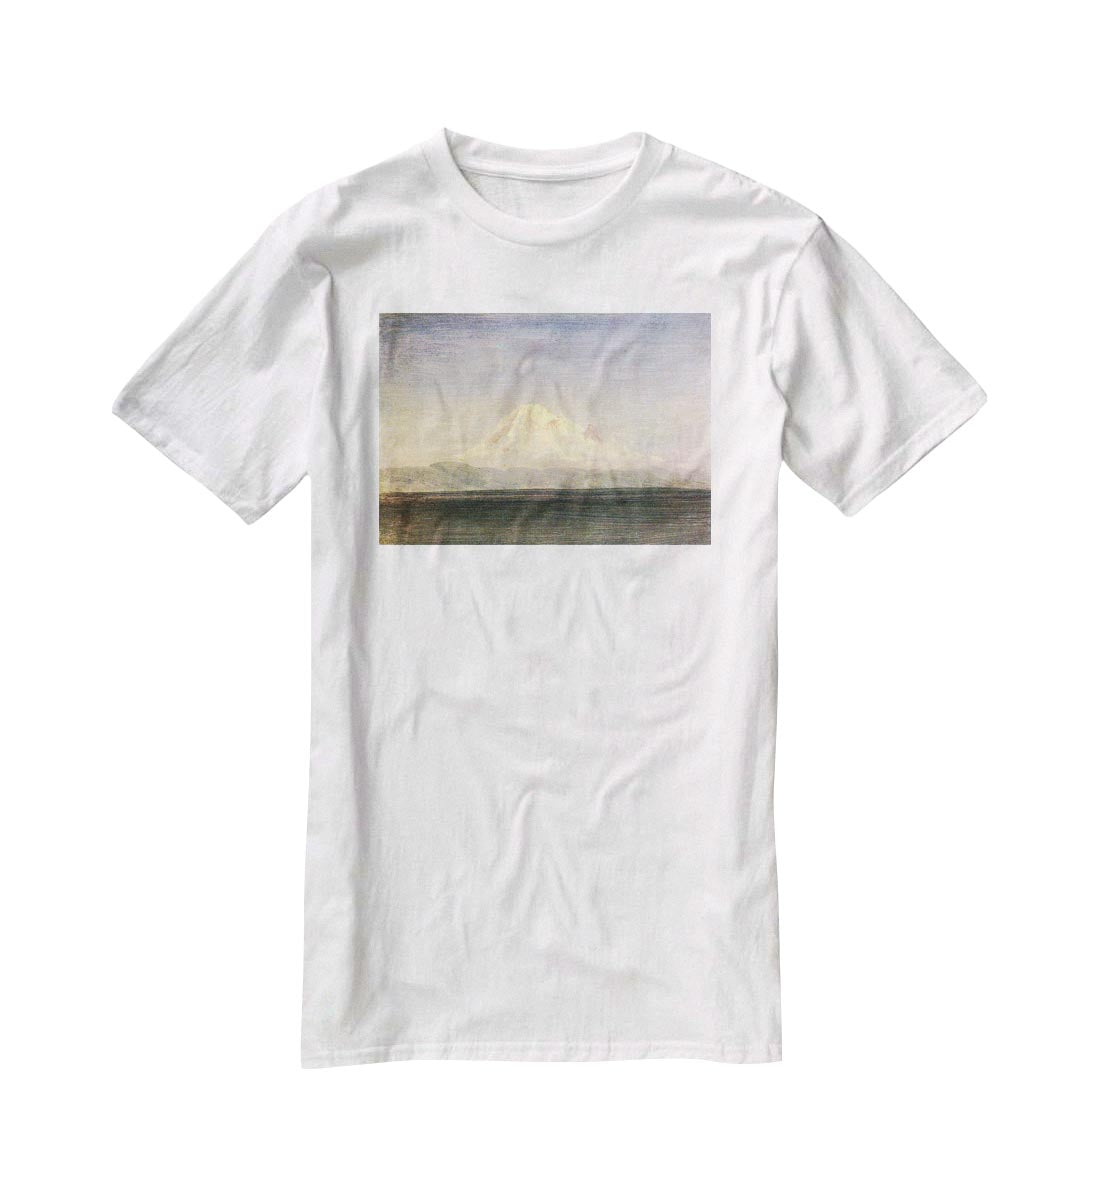 Snowy Mountains in the Pacific Northwest by Bierstadt T-Shirt - Canvas Art Rocks - 5